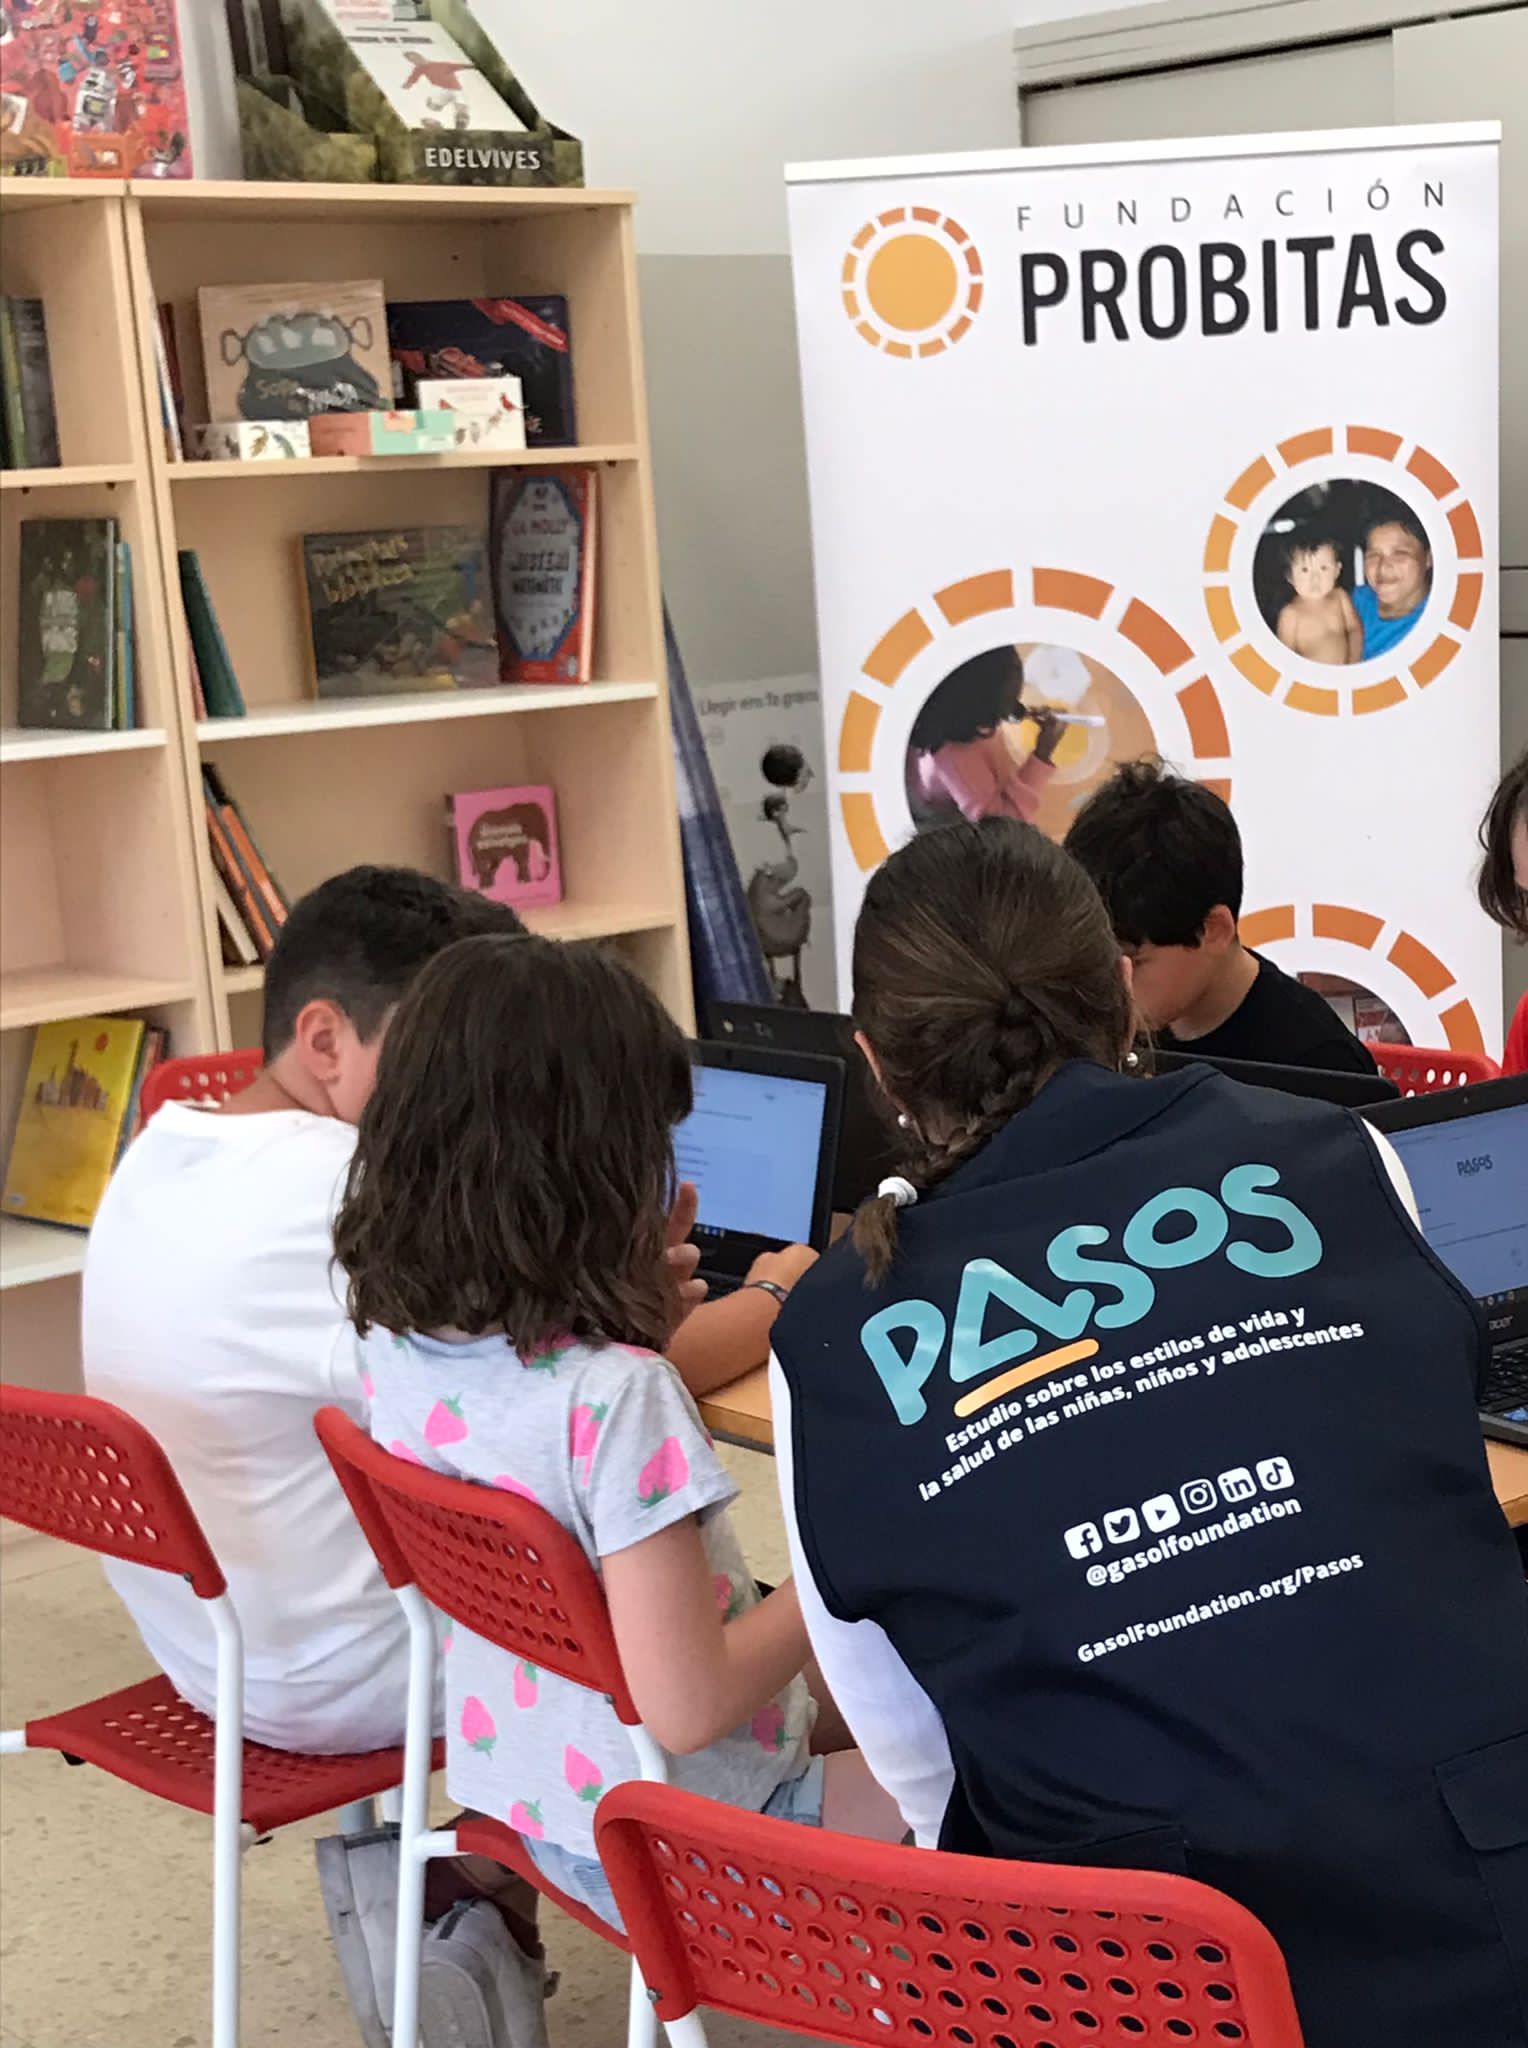 More than 3,000 children evaluated so far in the second edition of the PASOS study